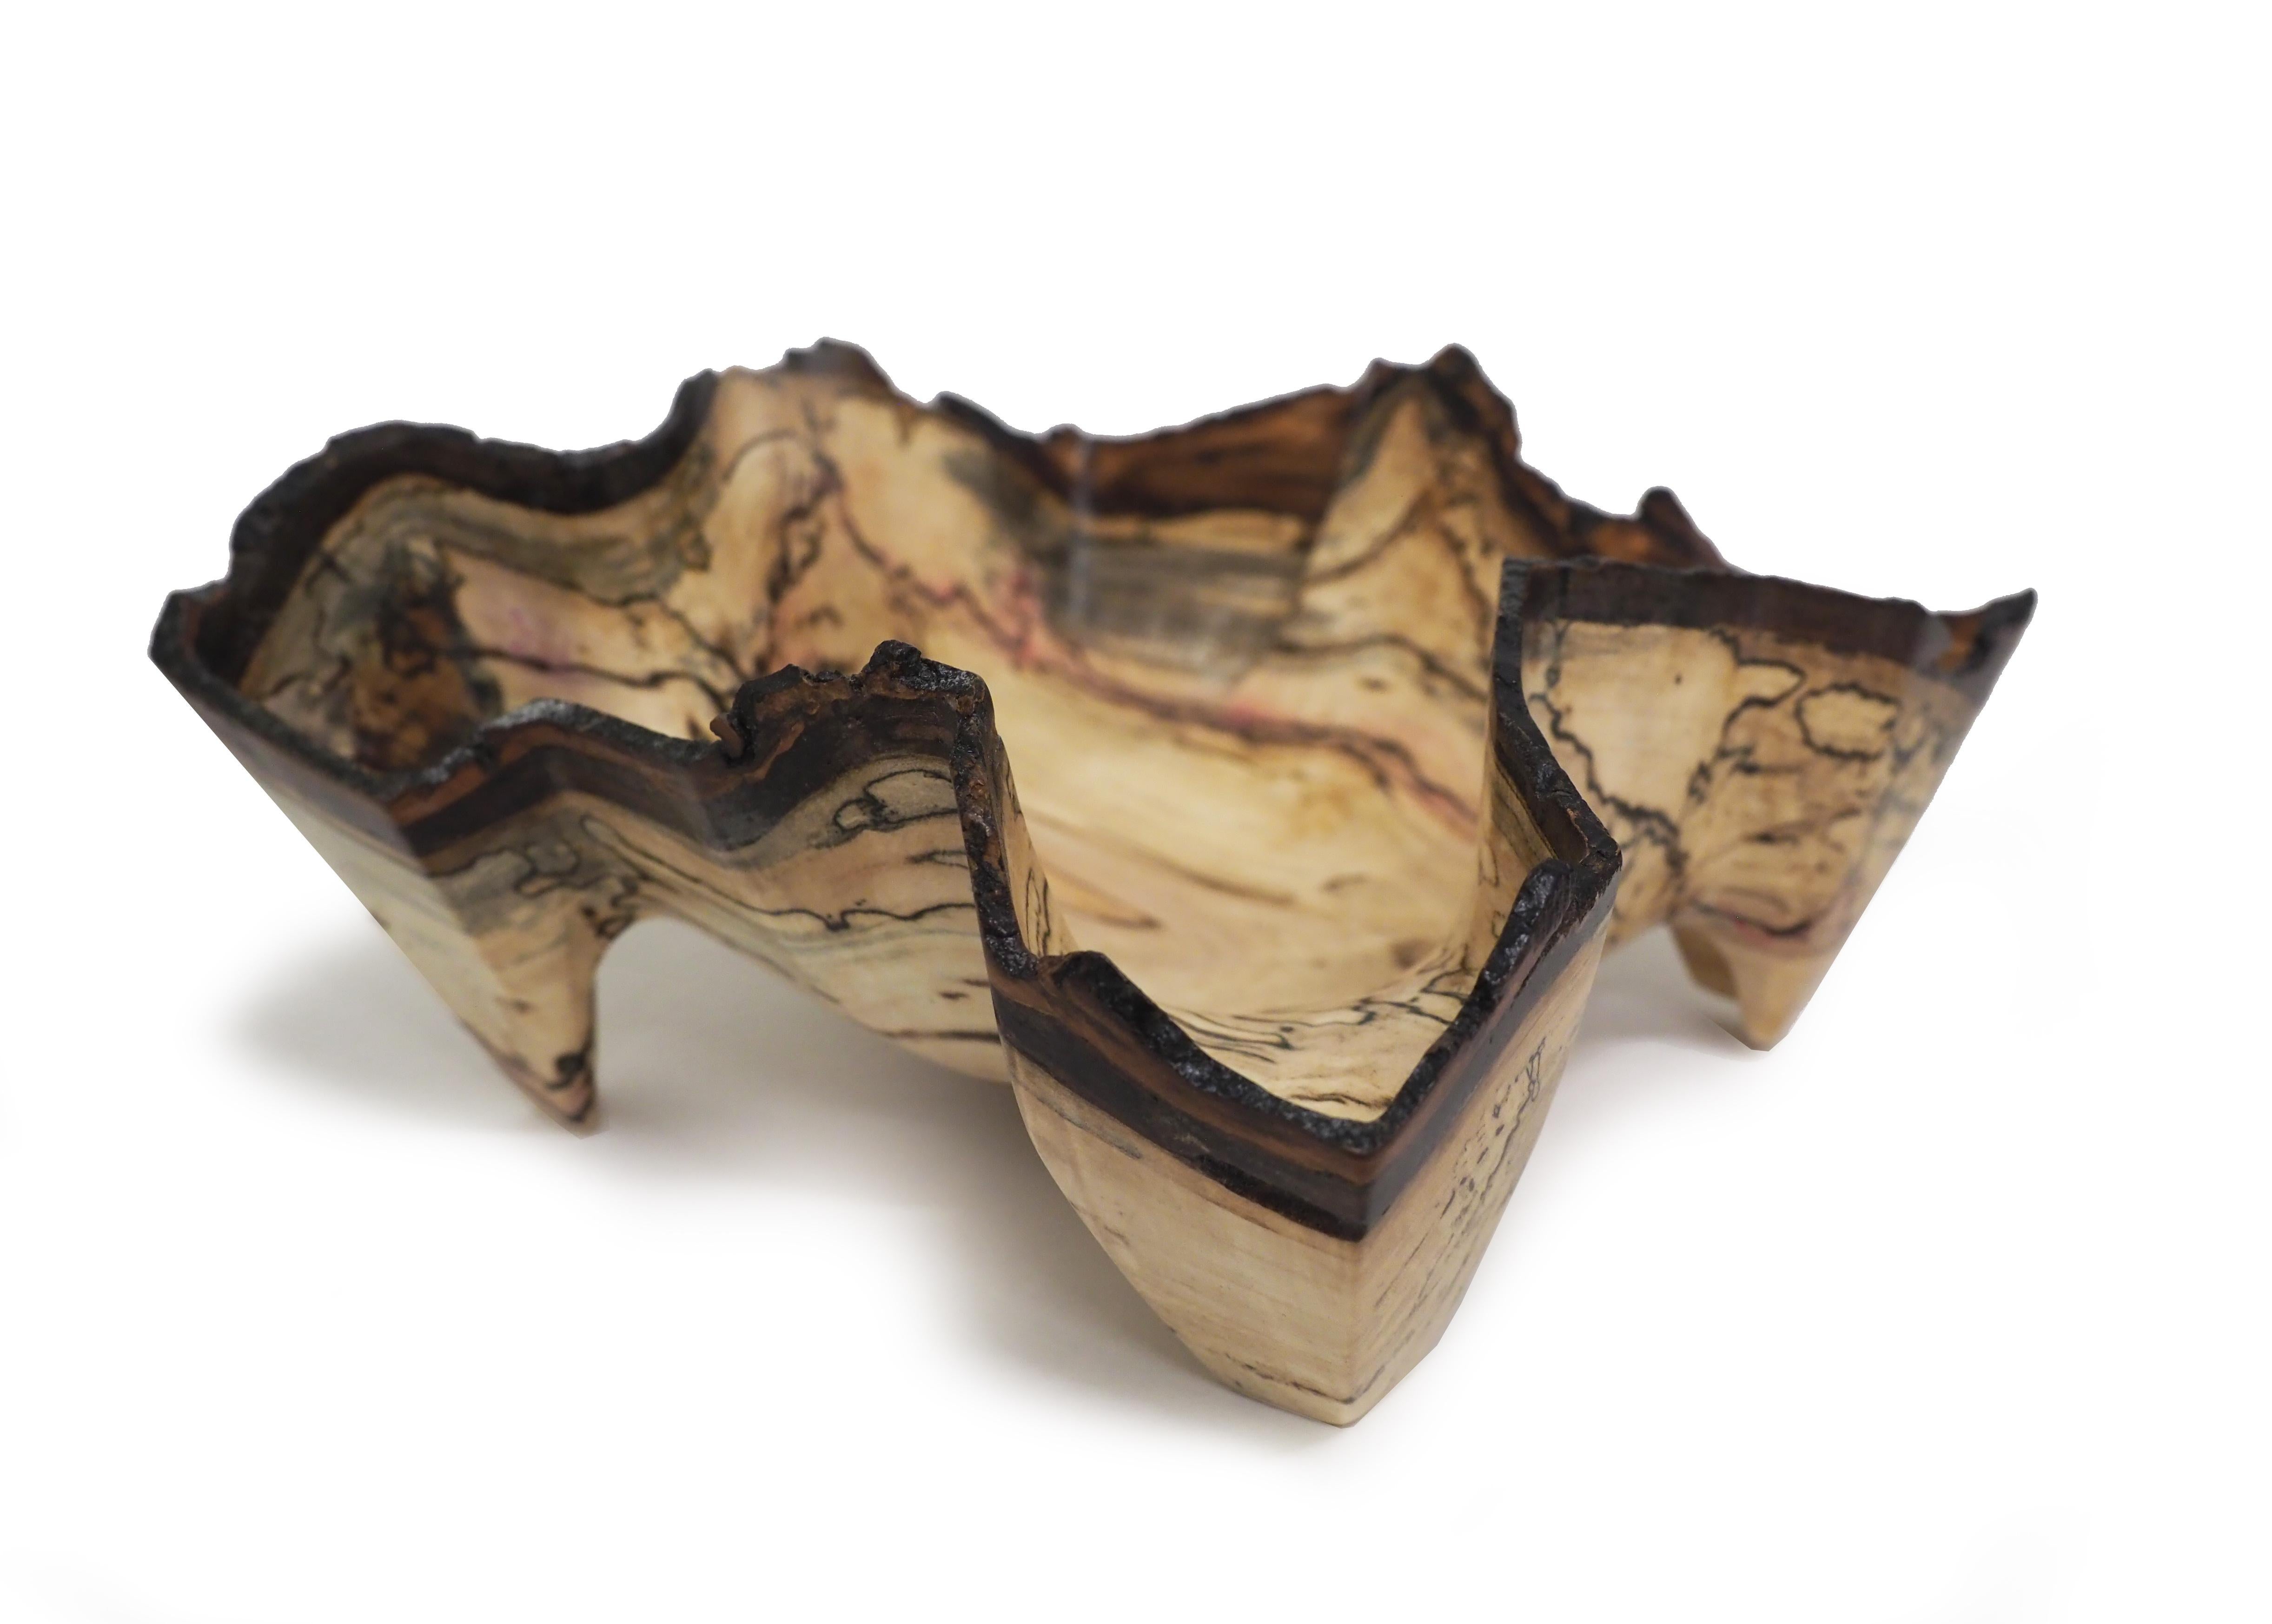 K2 by Brad Sells is a beautiful, rustic sculpture made from maple burl. 